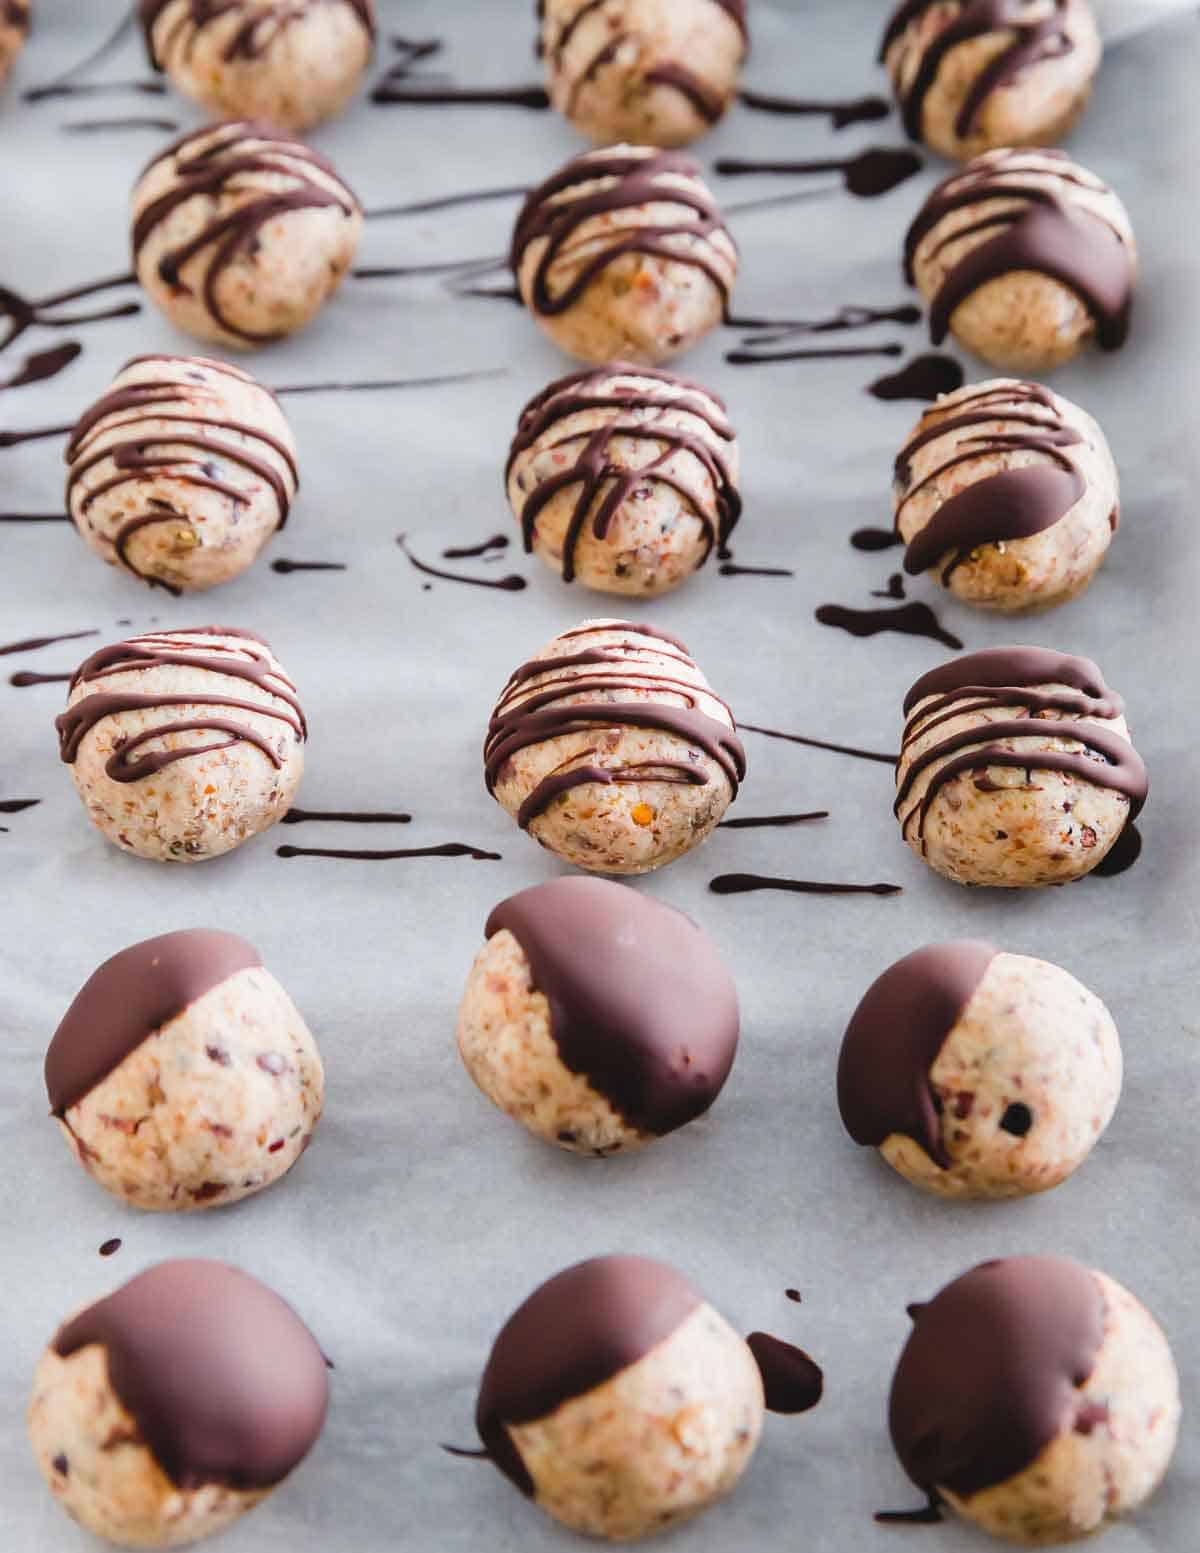 Edible healthy cookie dough bites made with almond pulp or almond flour are a delicious tasty treat.